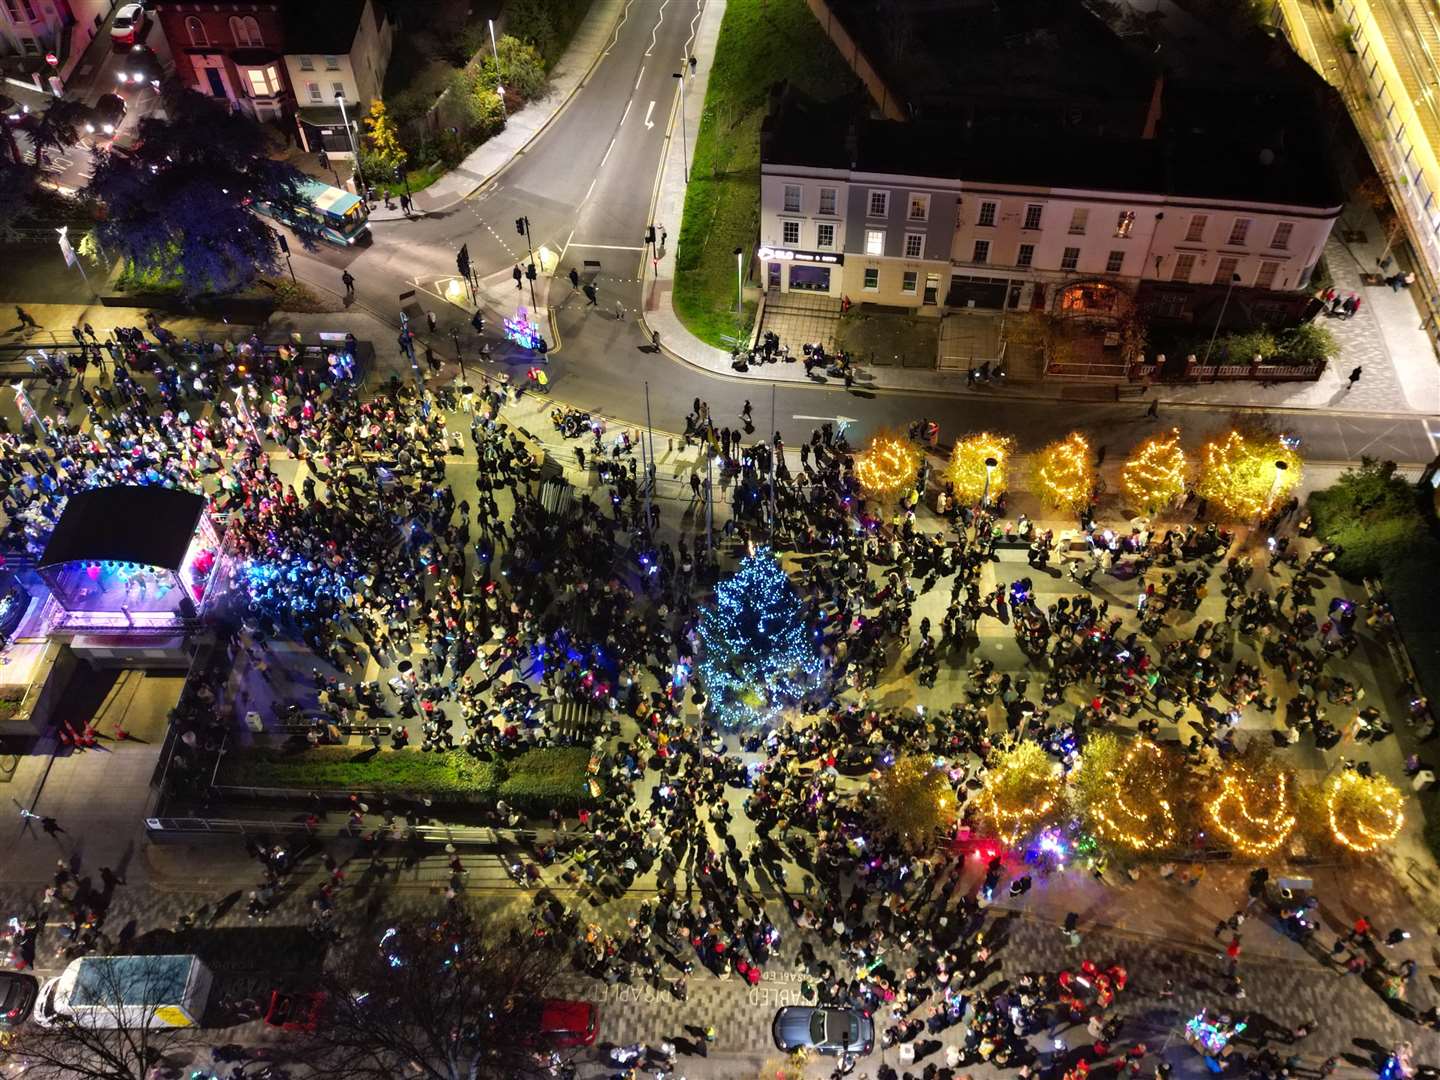 More than 2,000 people gathered as part of the Christmas parade. Picture: Jason Arthur